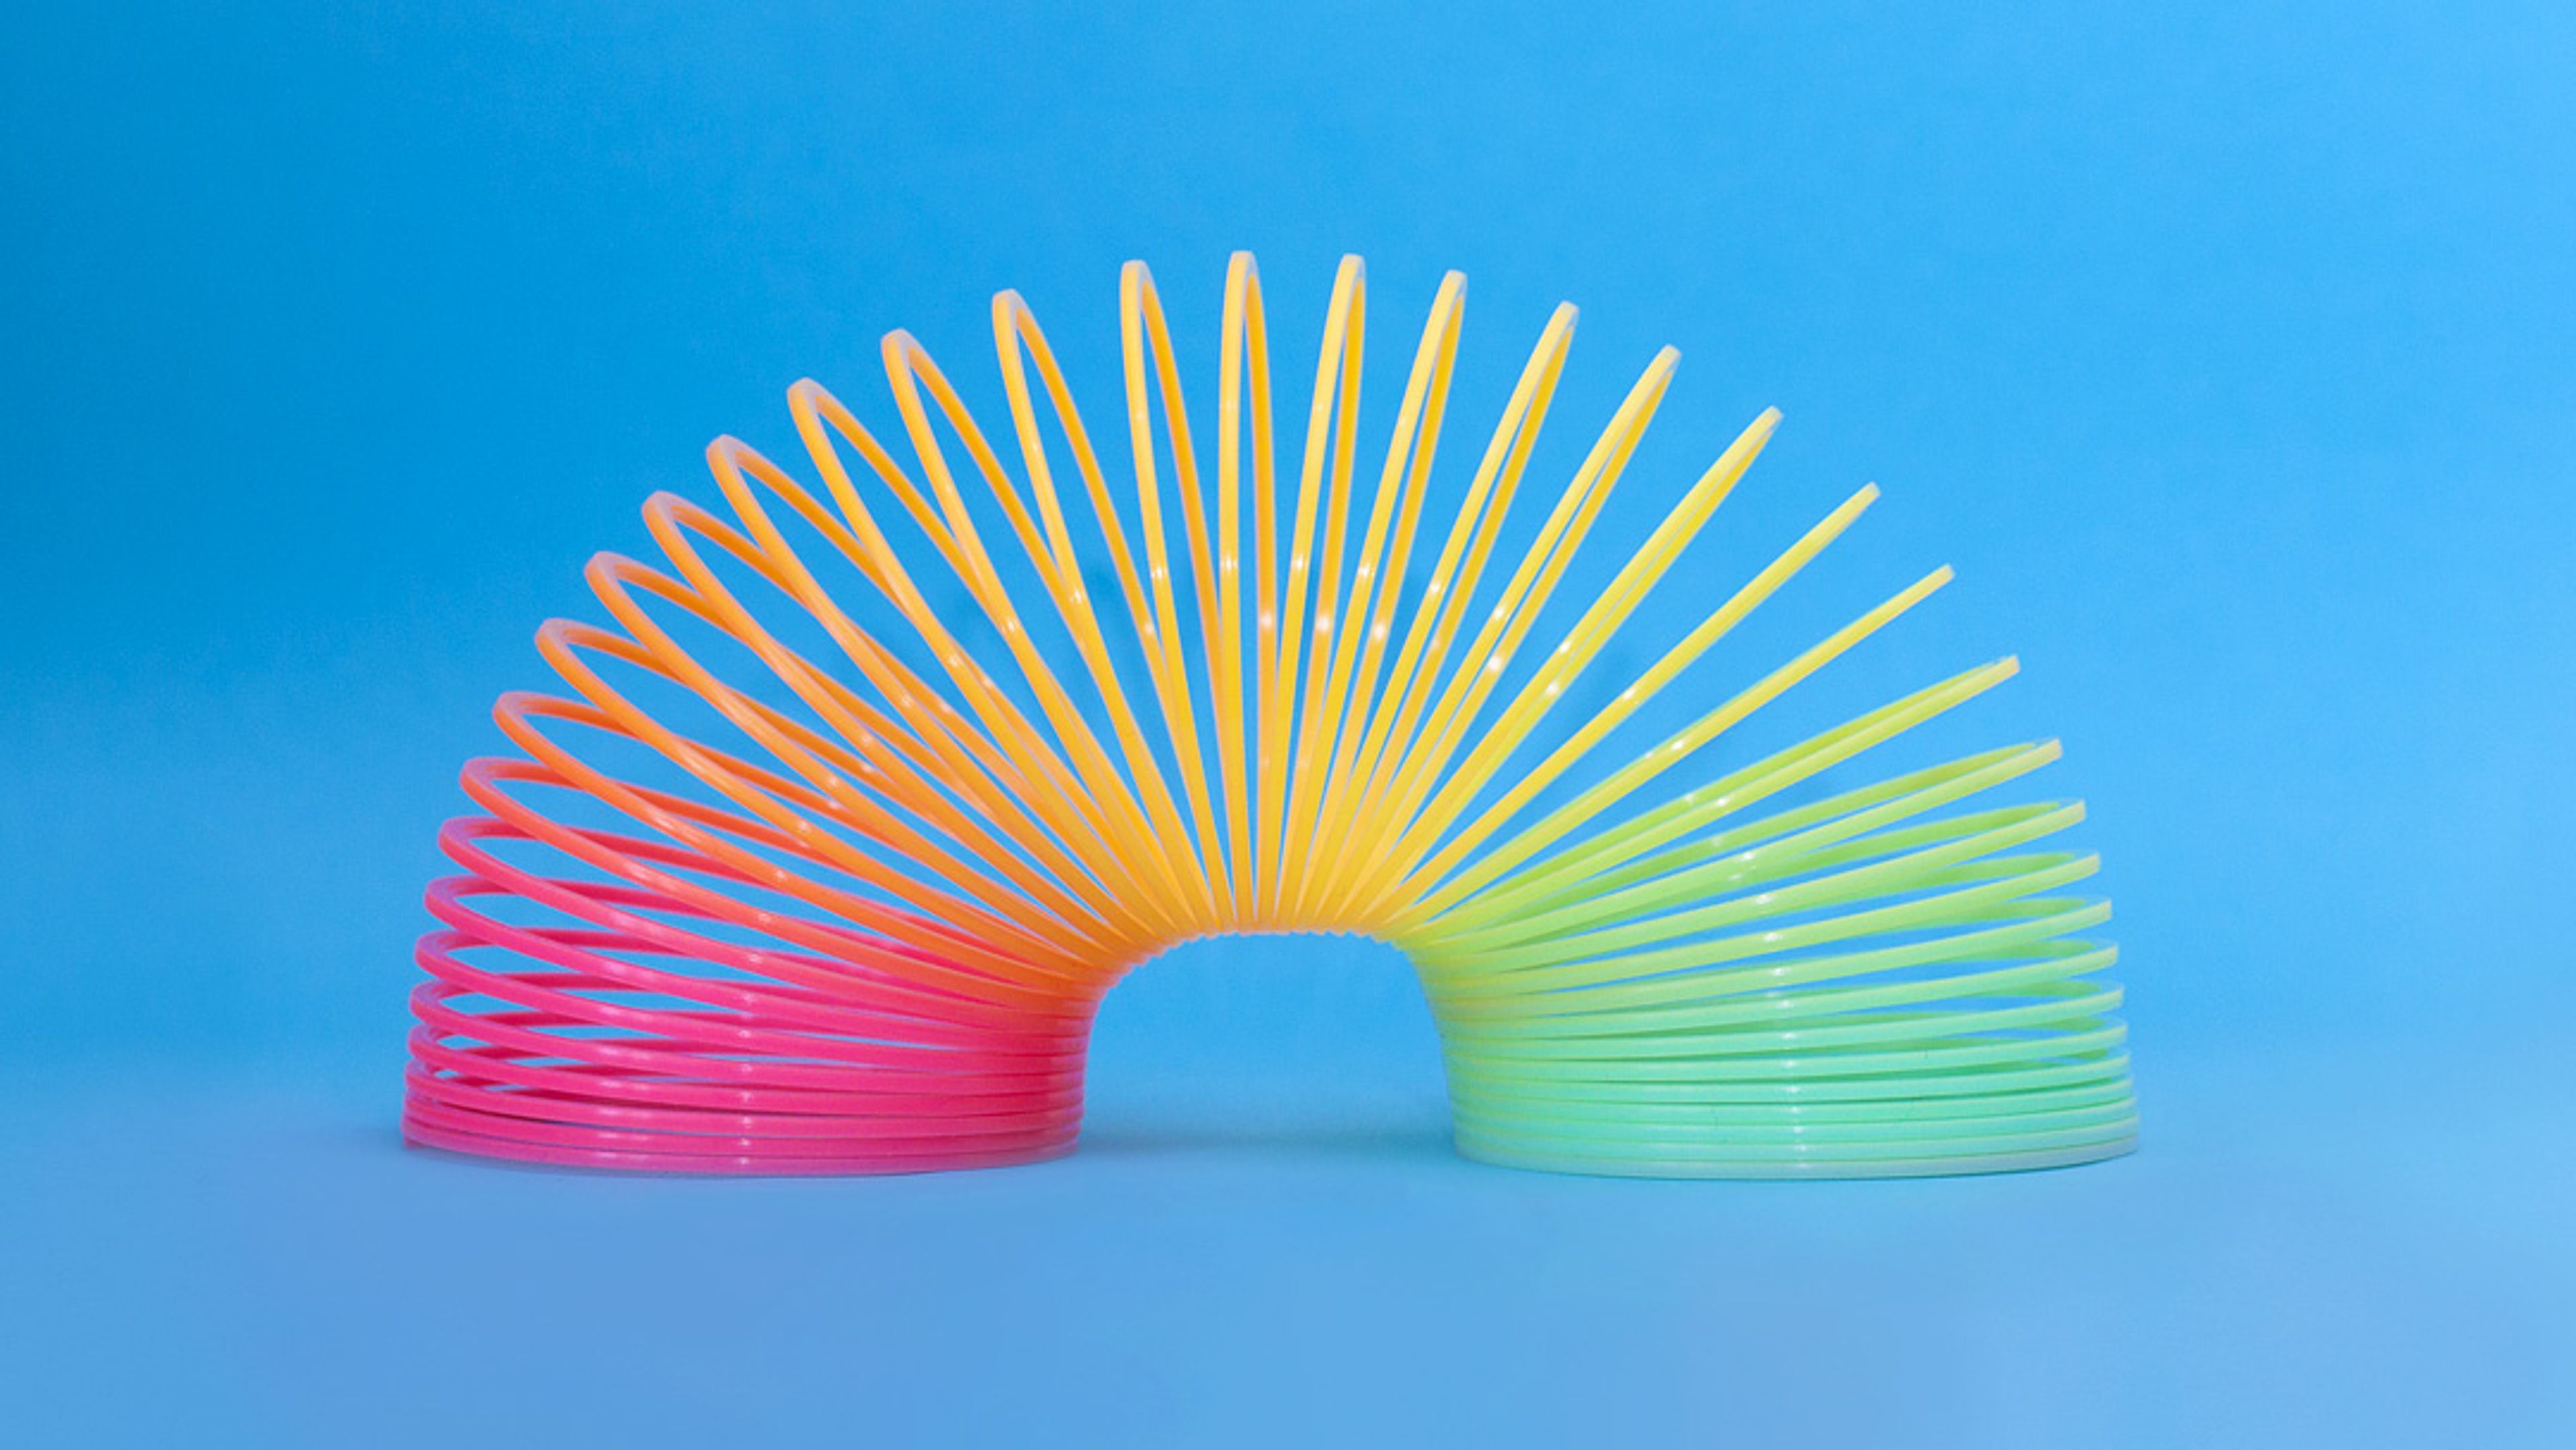 Image of a slinky toy 